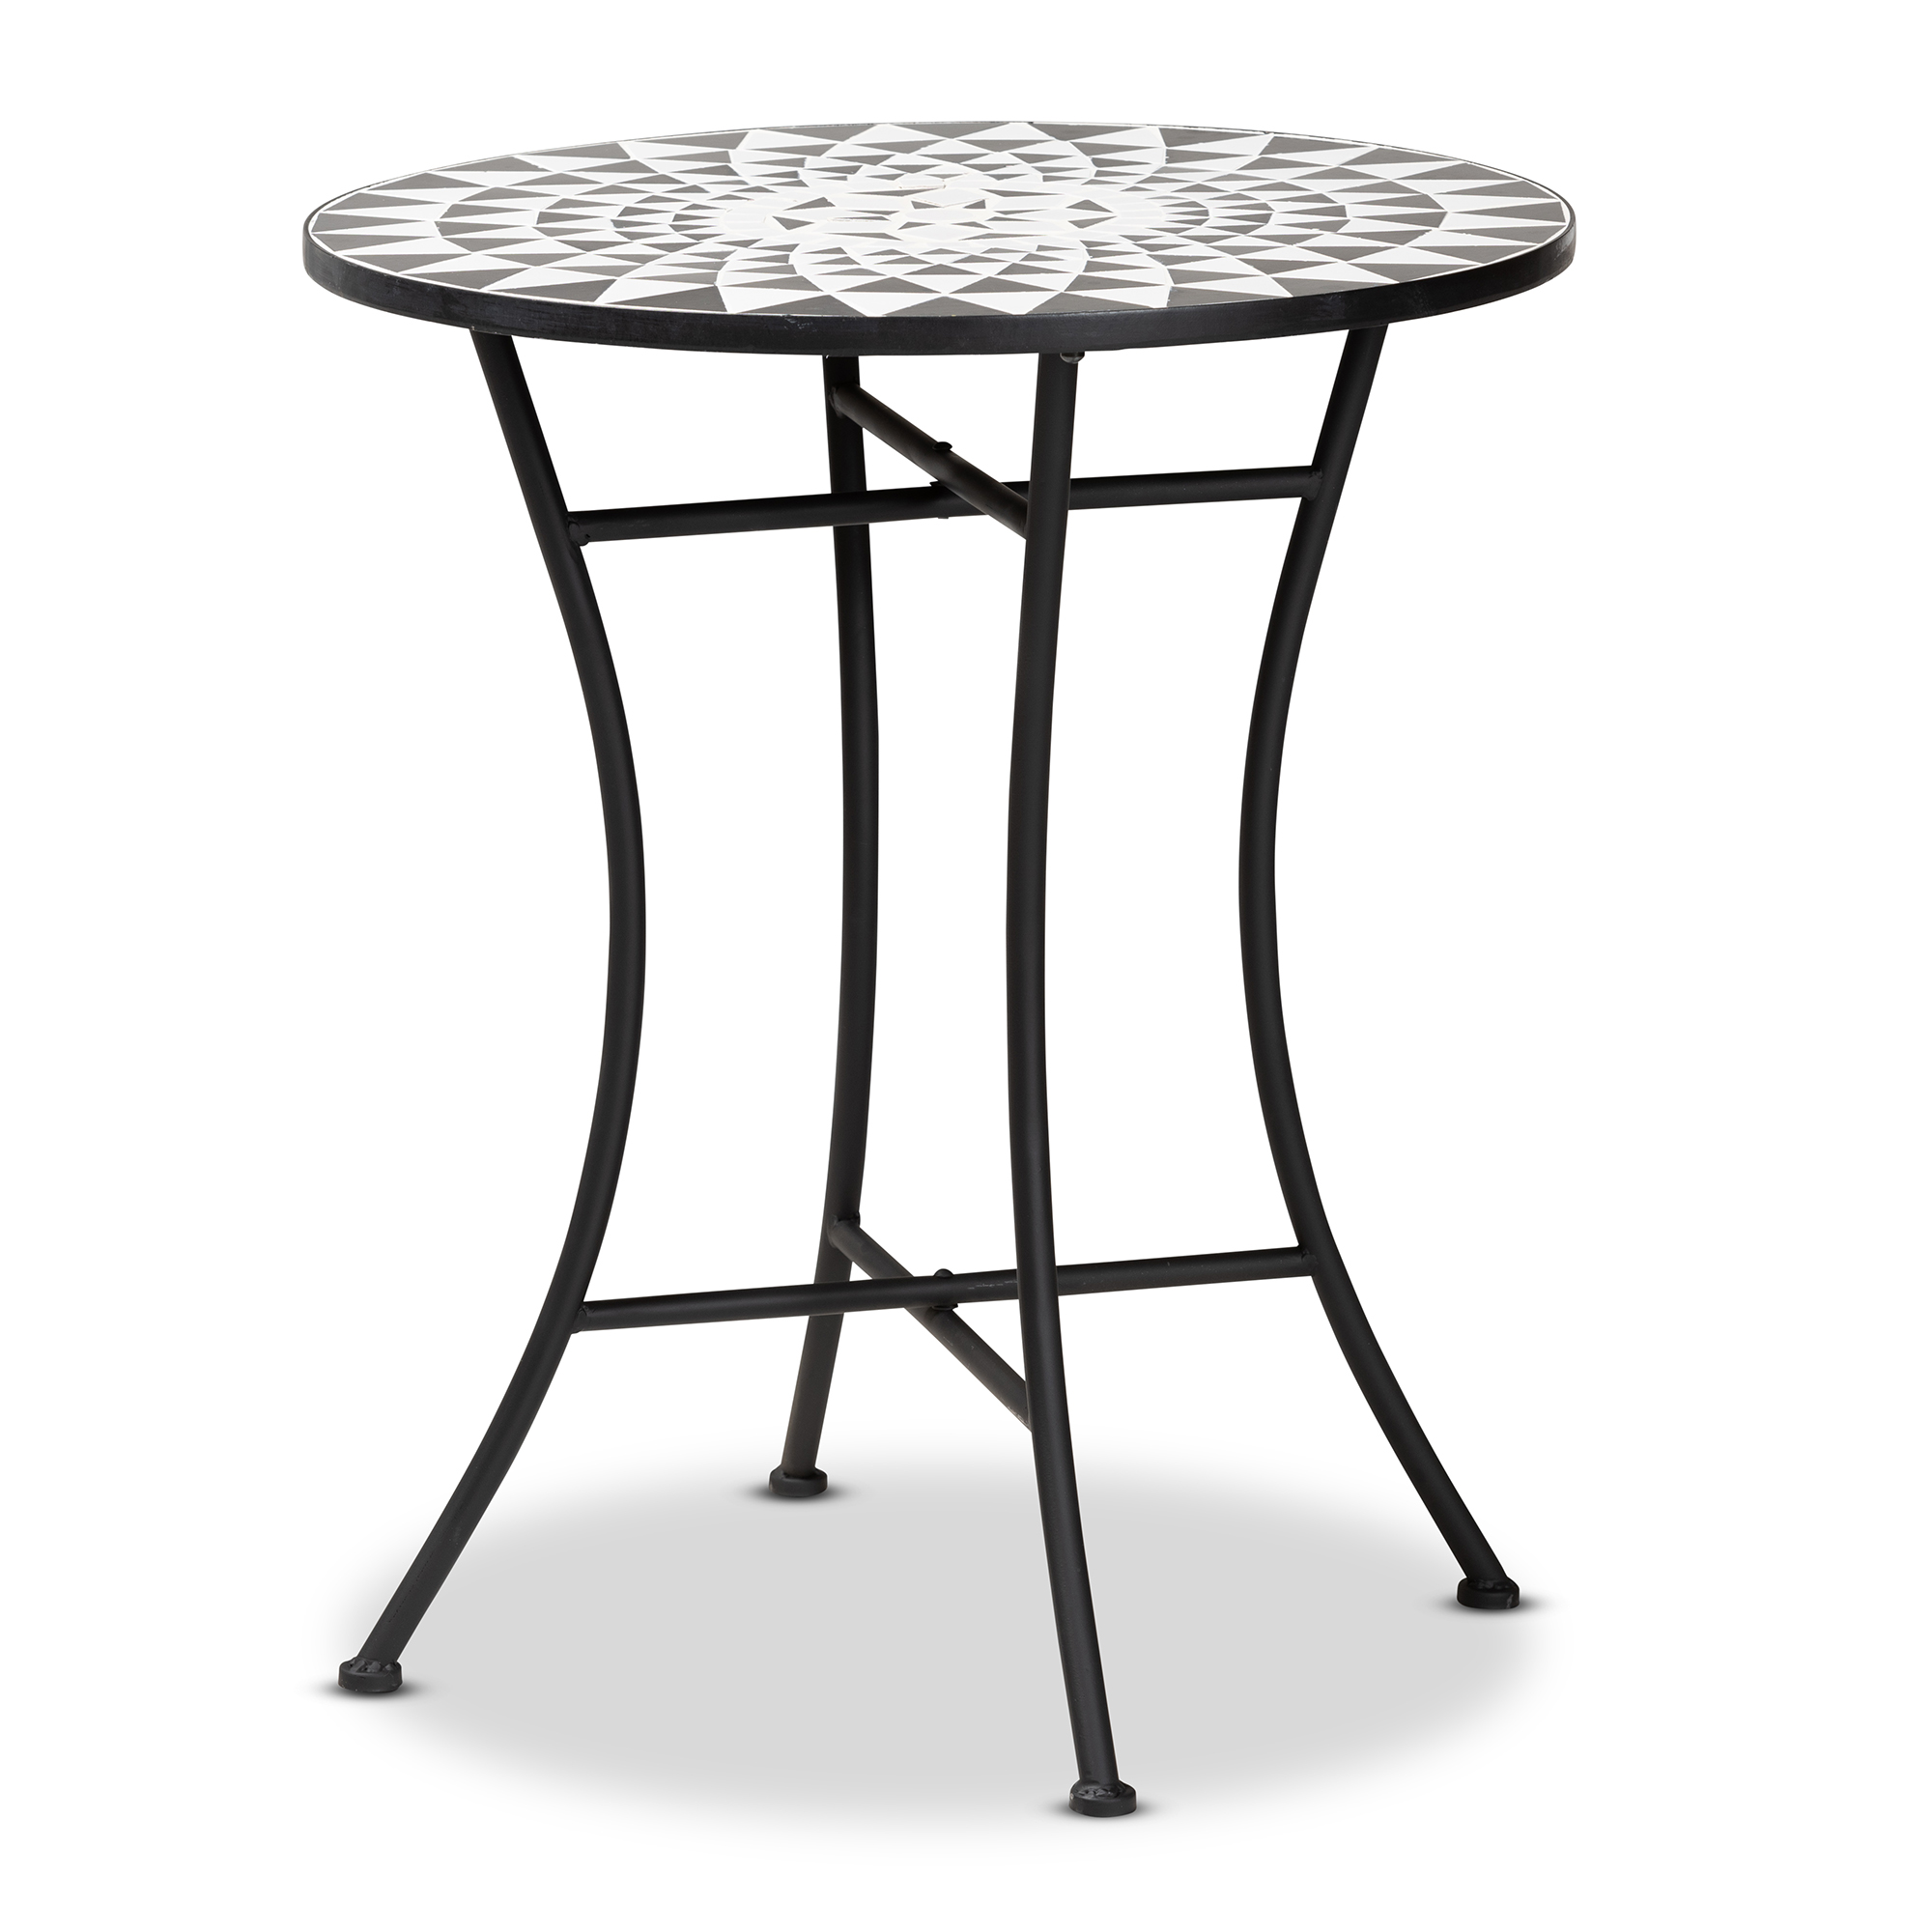 Baxton Studio Callison Modern and Contemporary Black Finished Metal and Multi-Colored Glass Outdoor Dining Table